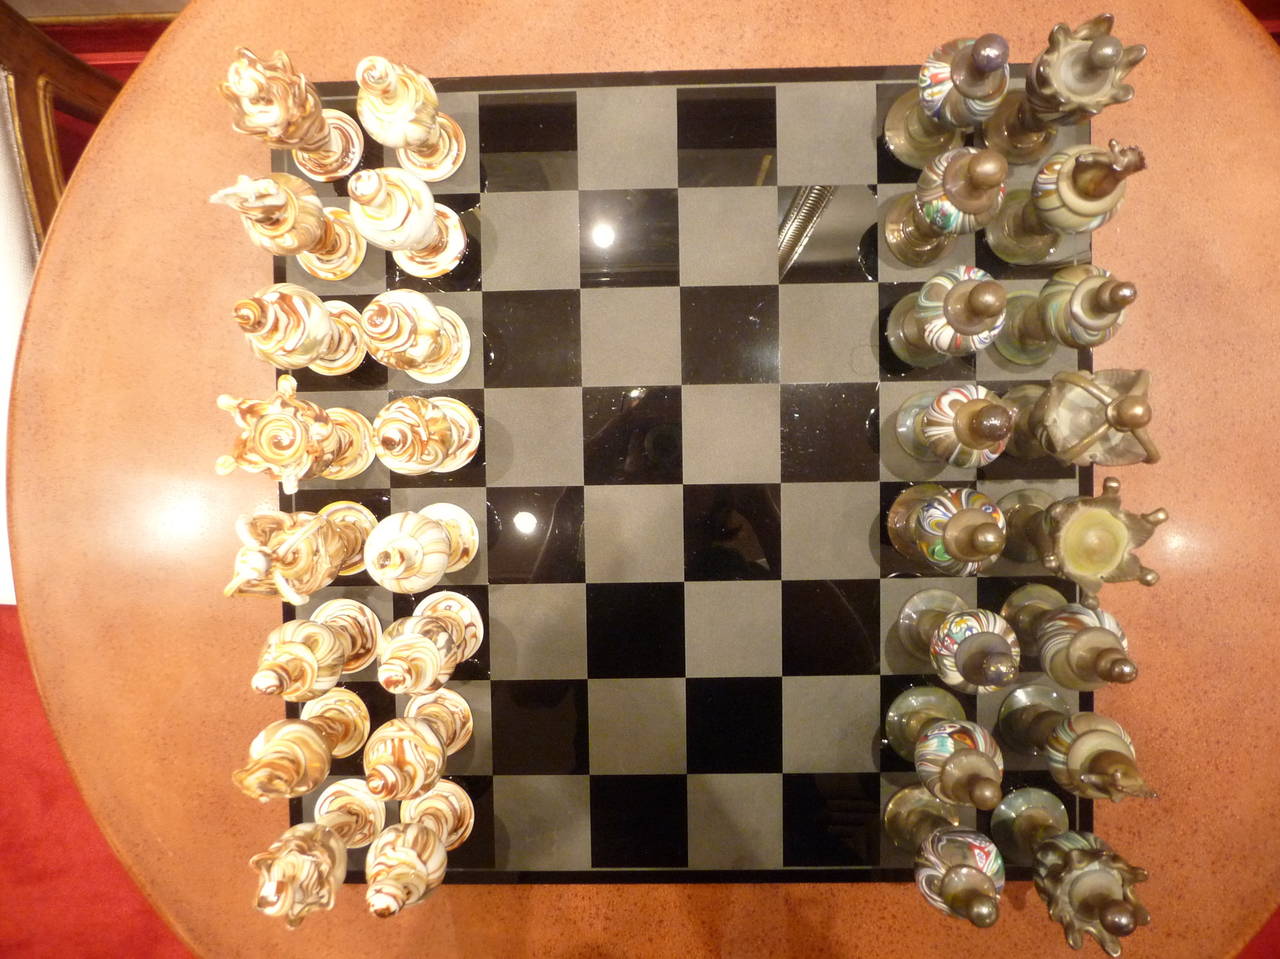 Chess set
32 pieces.
The pieces are signed "Orom."